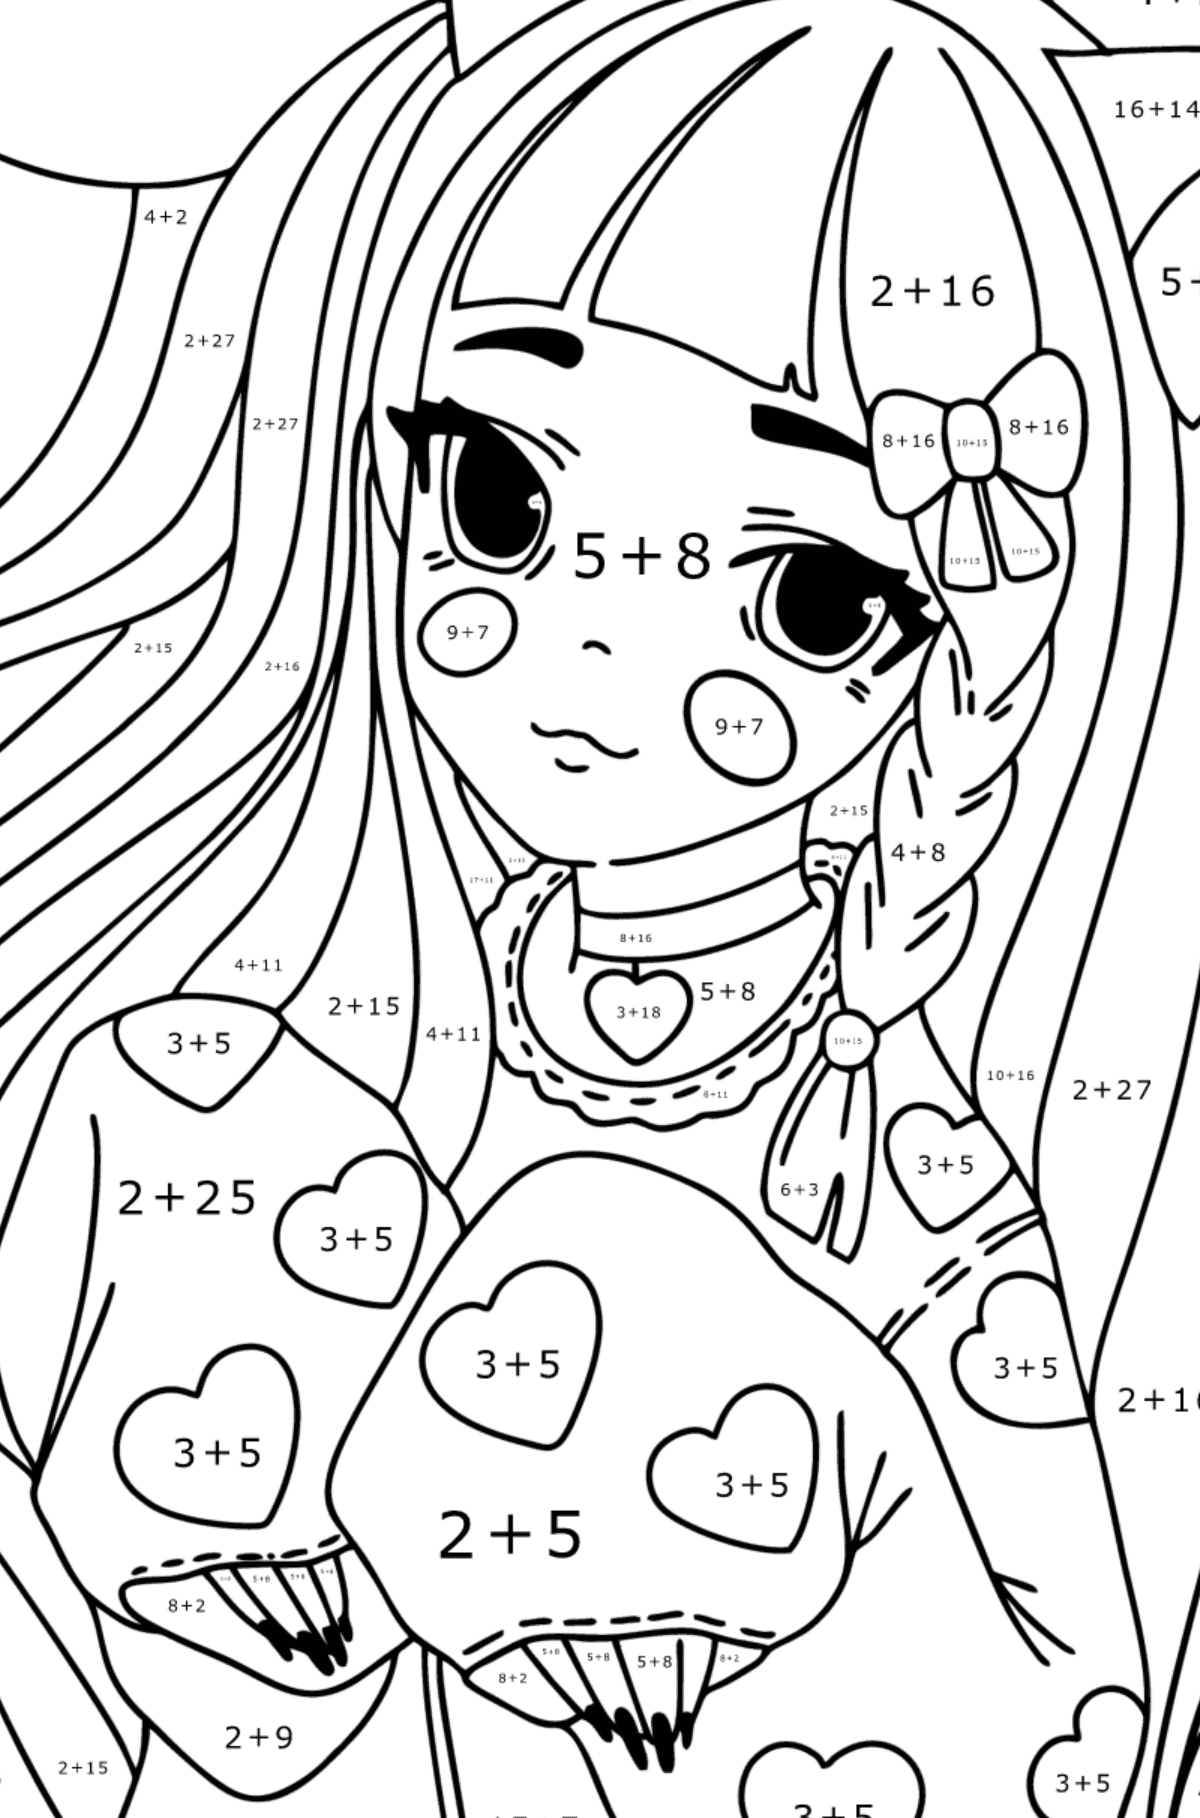 Anime girl with ears and paws coloring page - Math Coloring - Addition for Kids